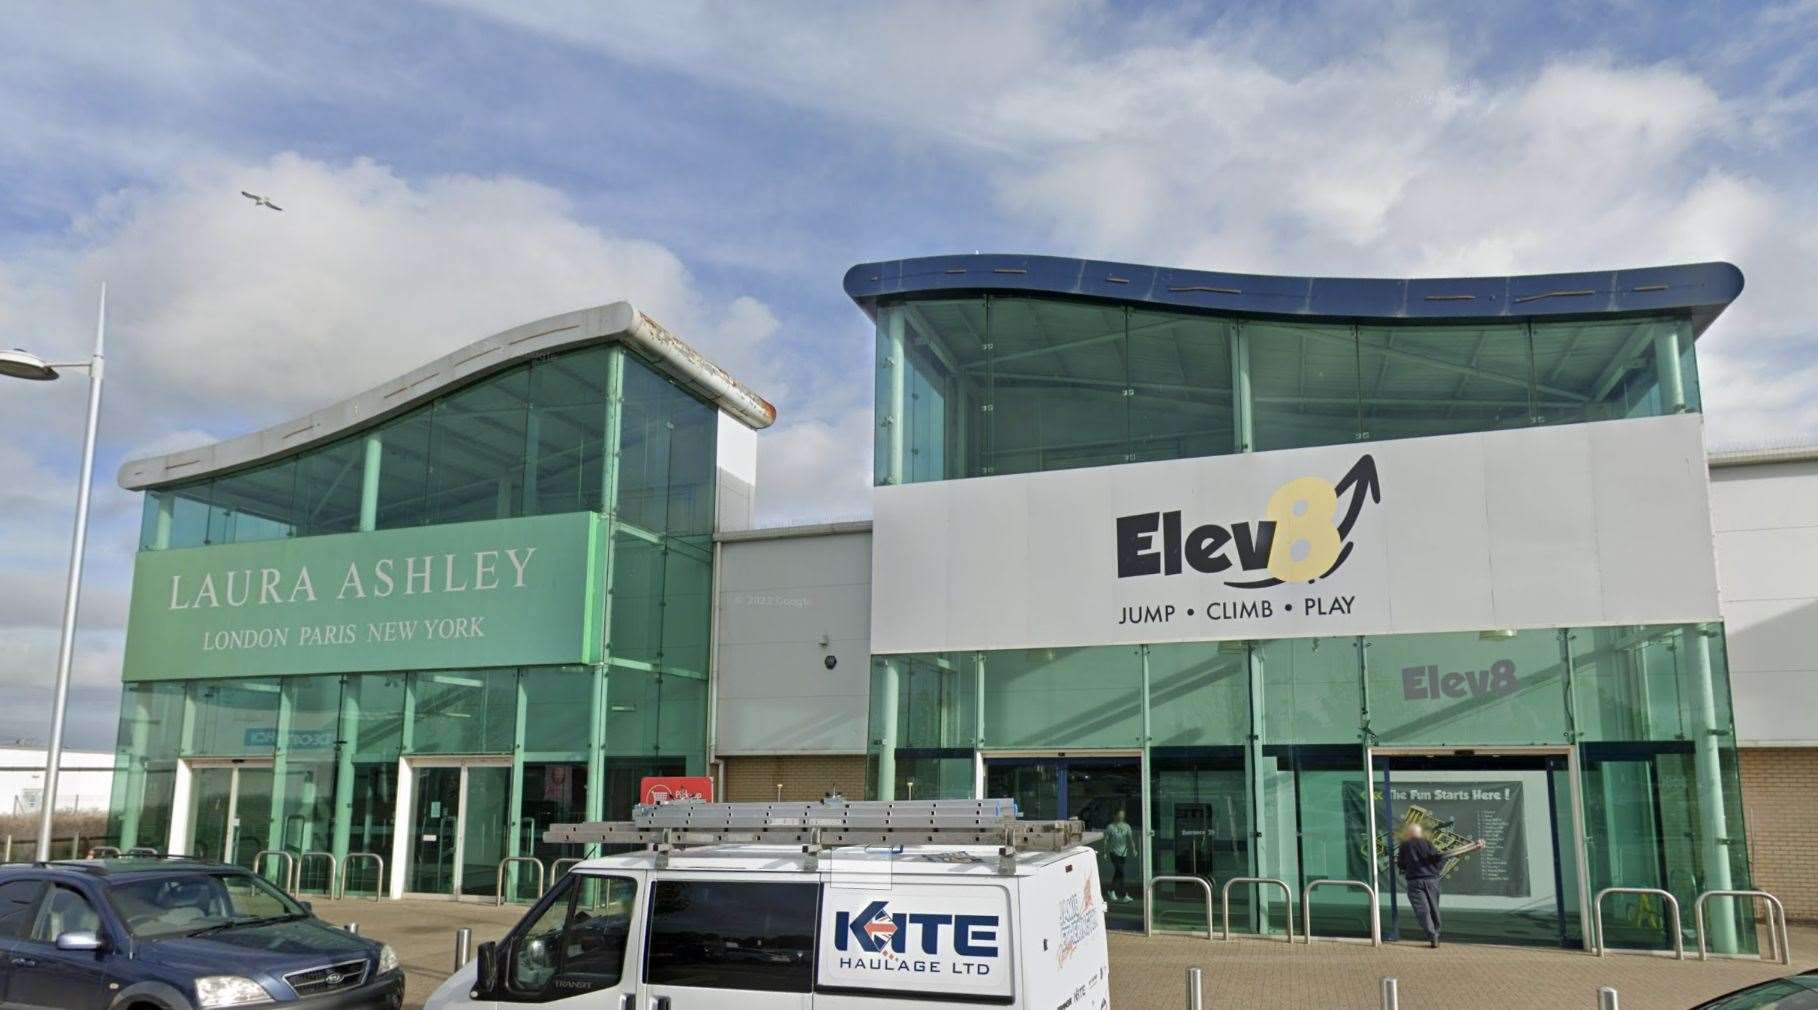 Elev8 in Broadstairs is set to double in size as it acquires the next-door Laura Ashley shop space. Picture: Google Maps